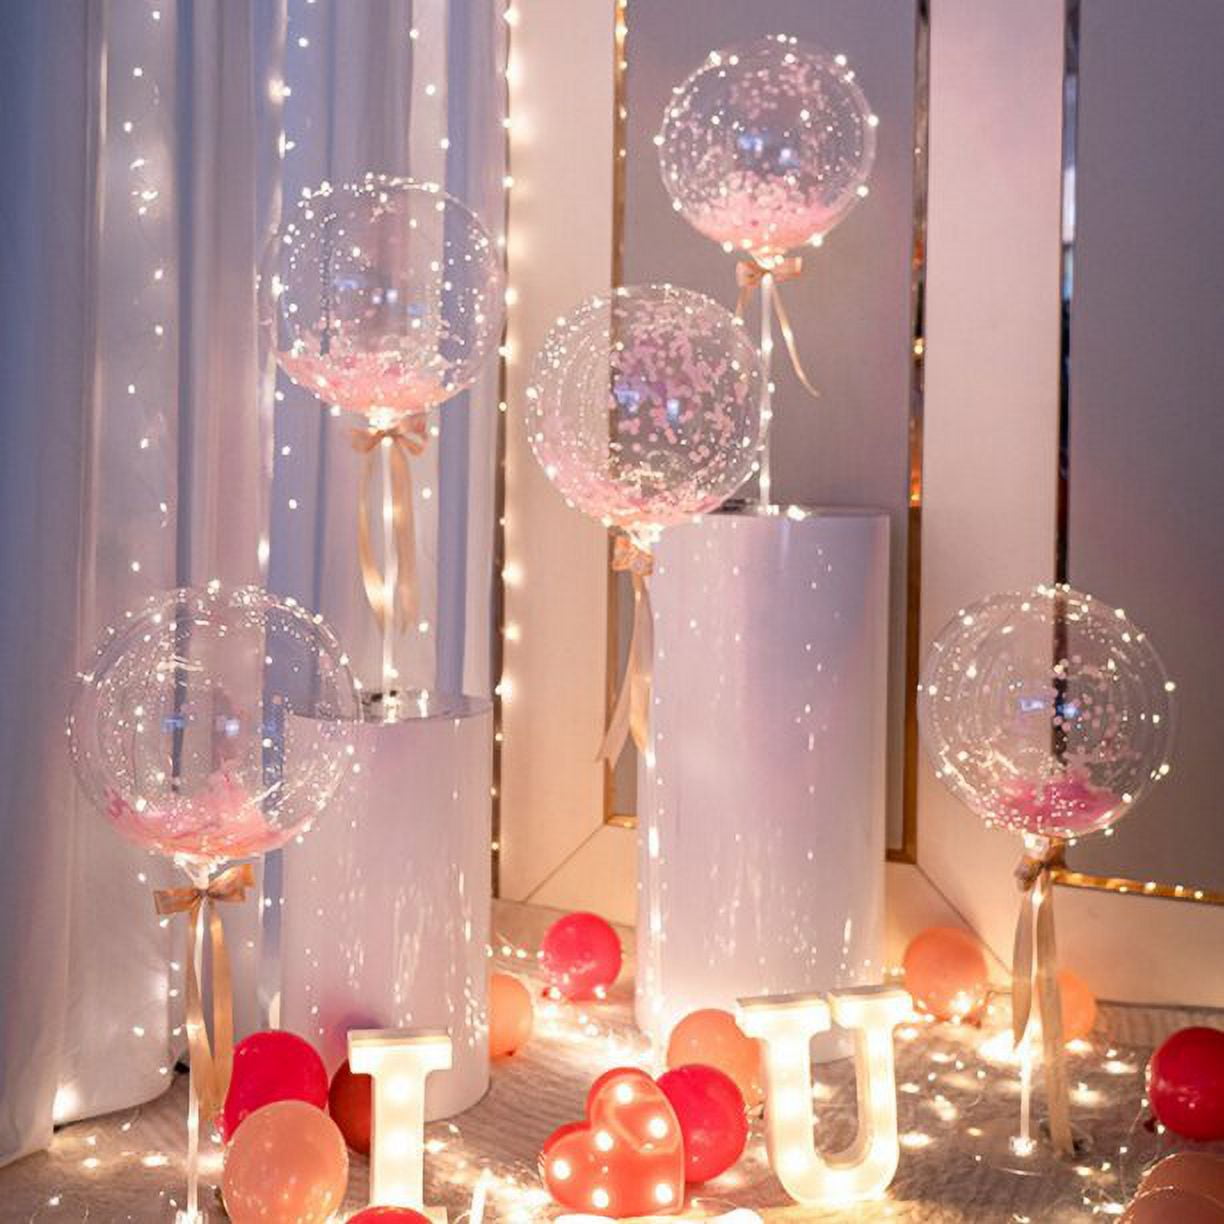 6 Packs Long Wands,20 Inch LED Light Up BoBo Balloons Colorful with Sticks,  10 PCS Transparent Balloons for Helium,Slumber Party Supplies,Christmas  Birthday Par…